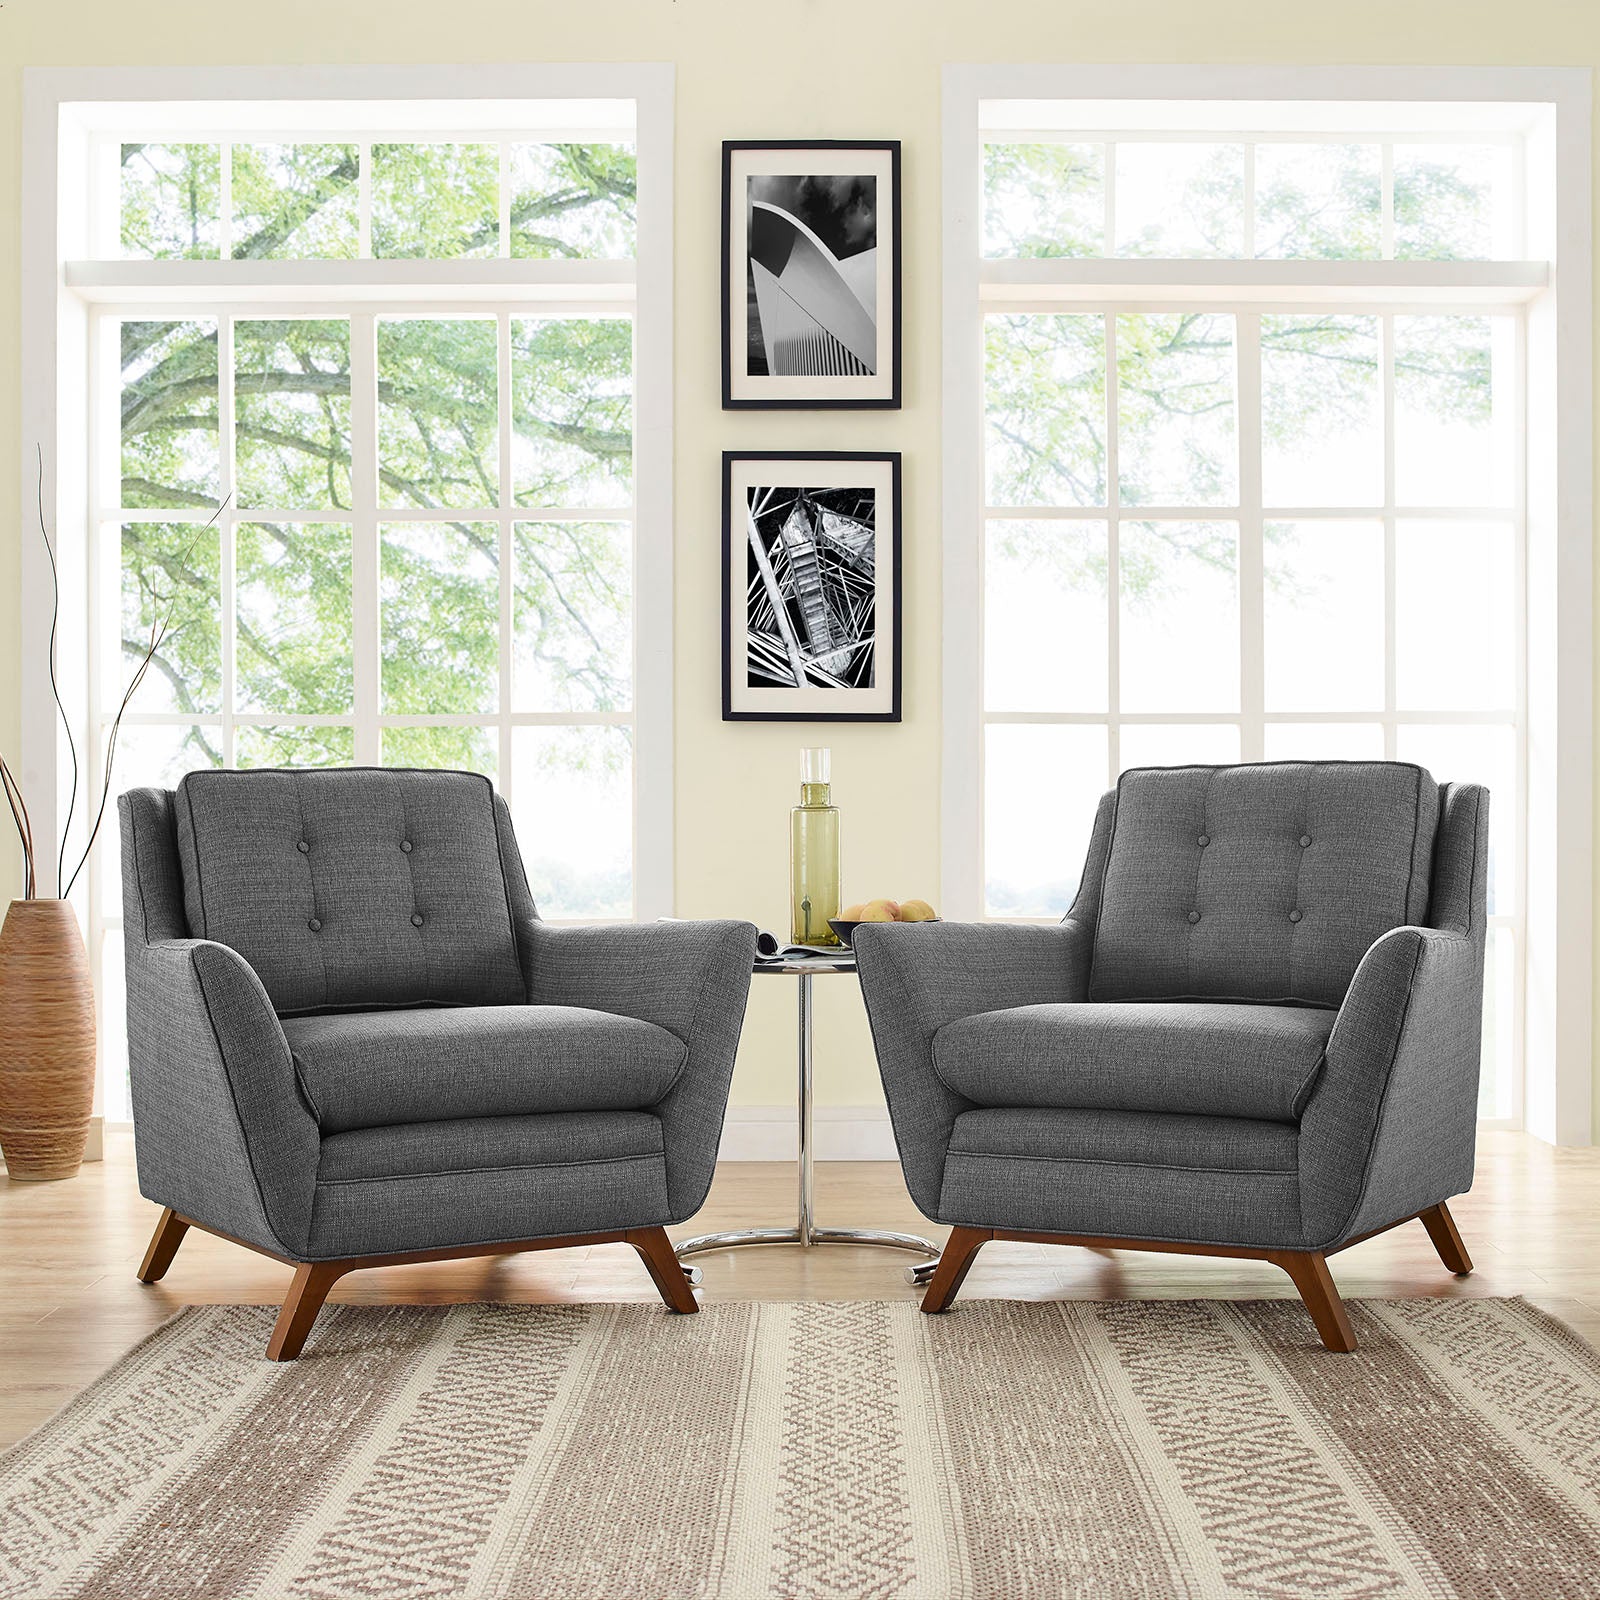 Modway Living Room Sets - Beguile 2 Piece Upholstered Fabric Living Room Set Gray